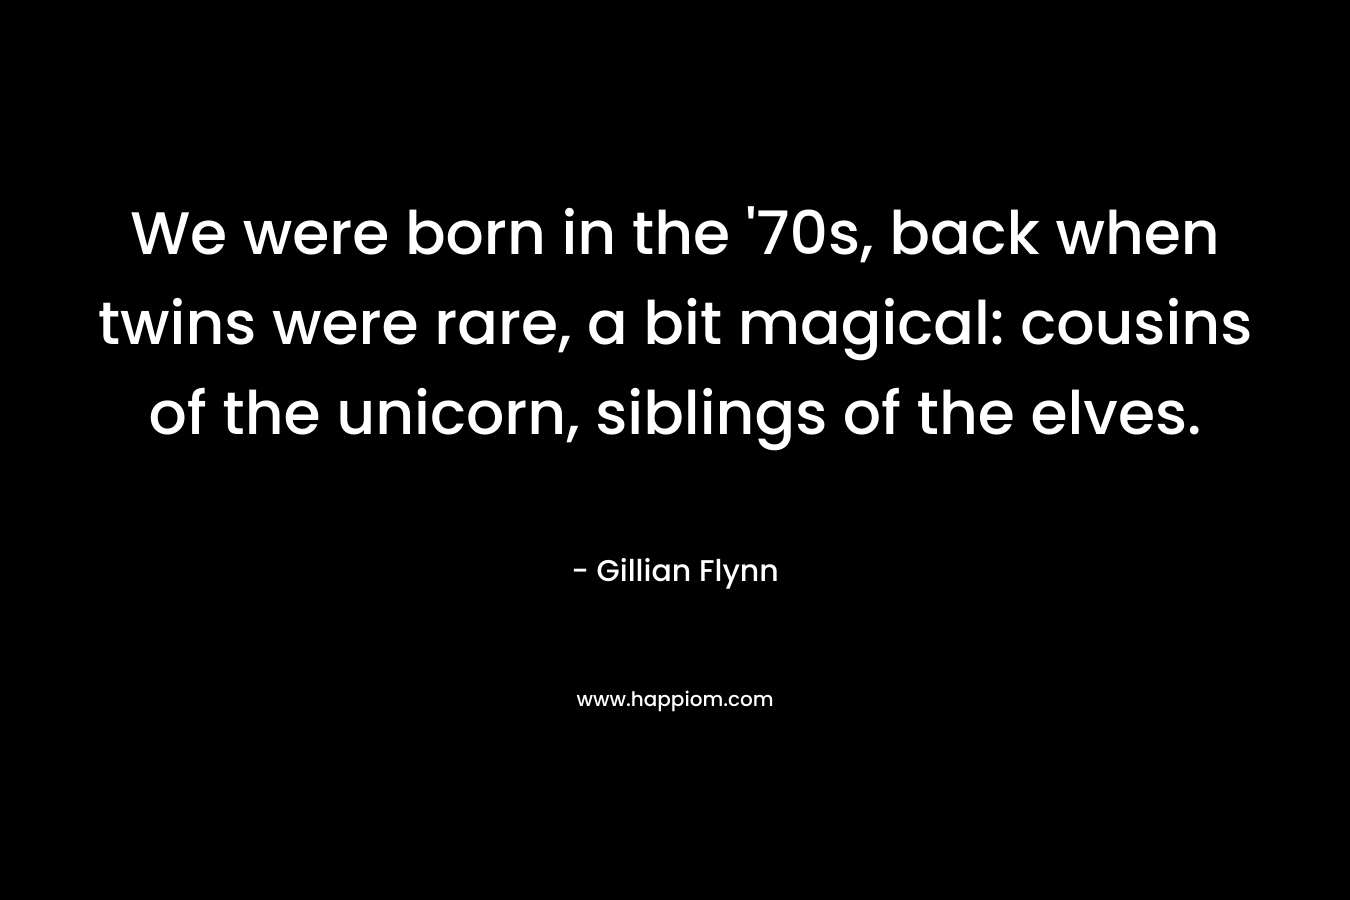 We were born in the ’70s, back when twins were rare, a bit magical: cousins of the unicorn, siblings of the elves. – Gillian Flynn